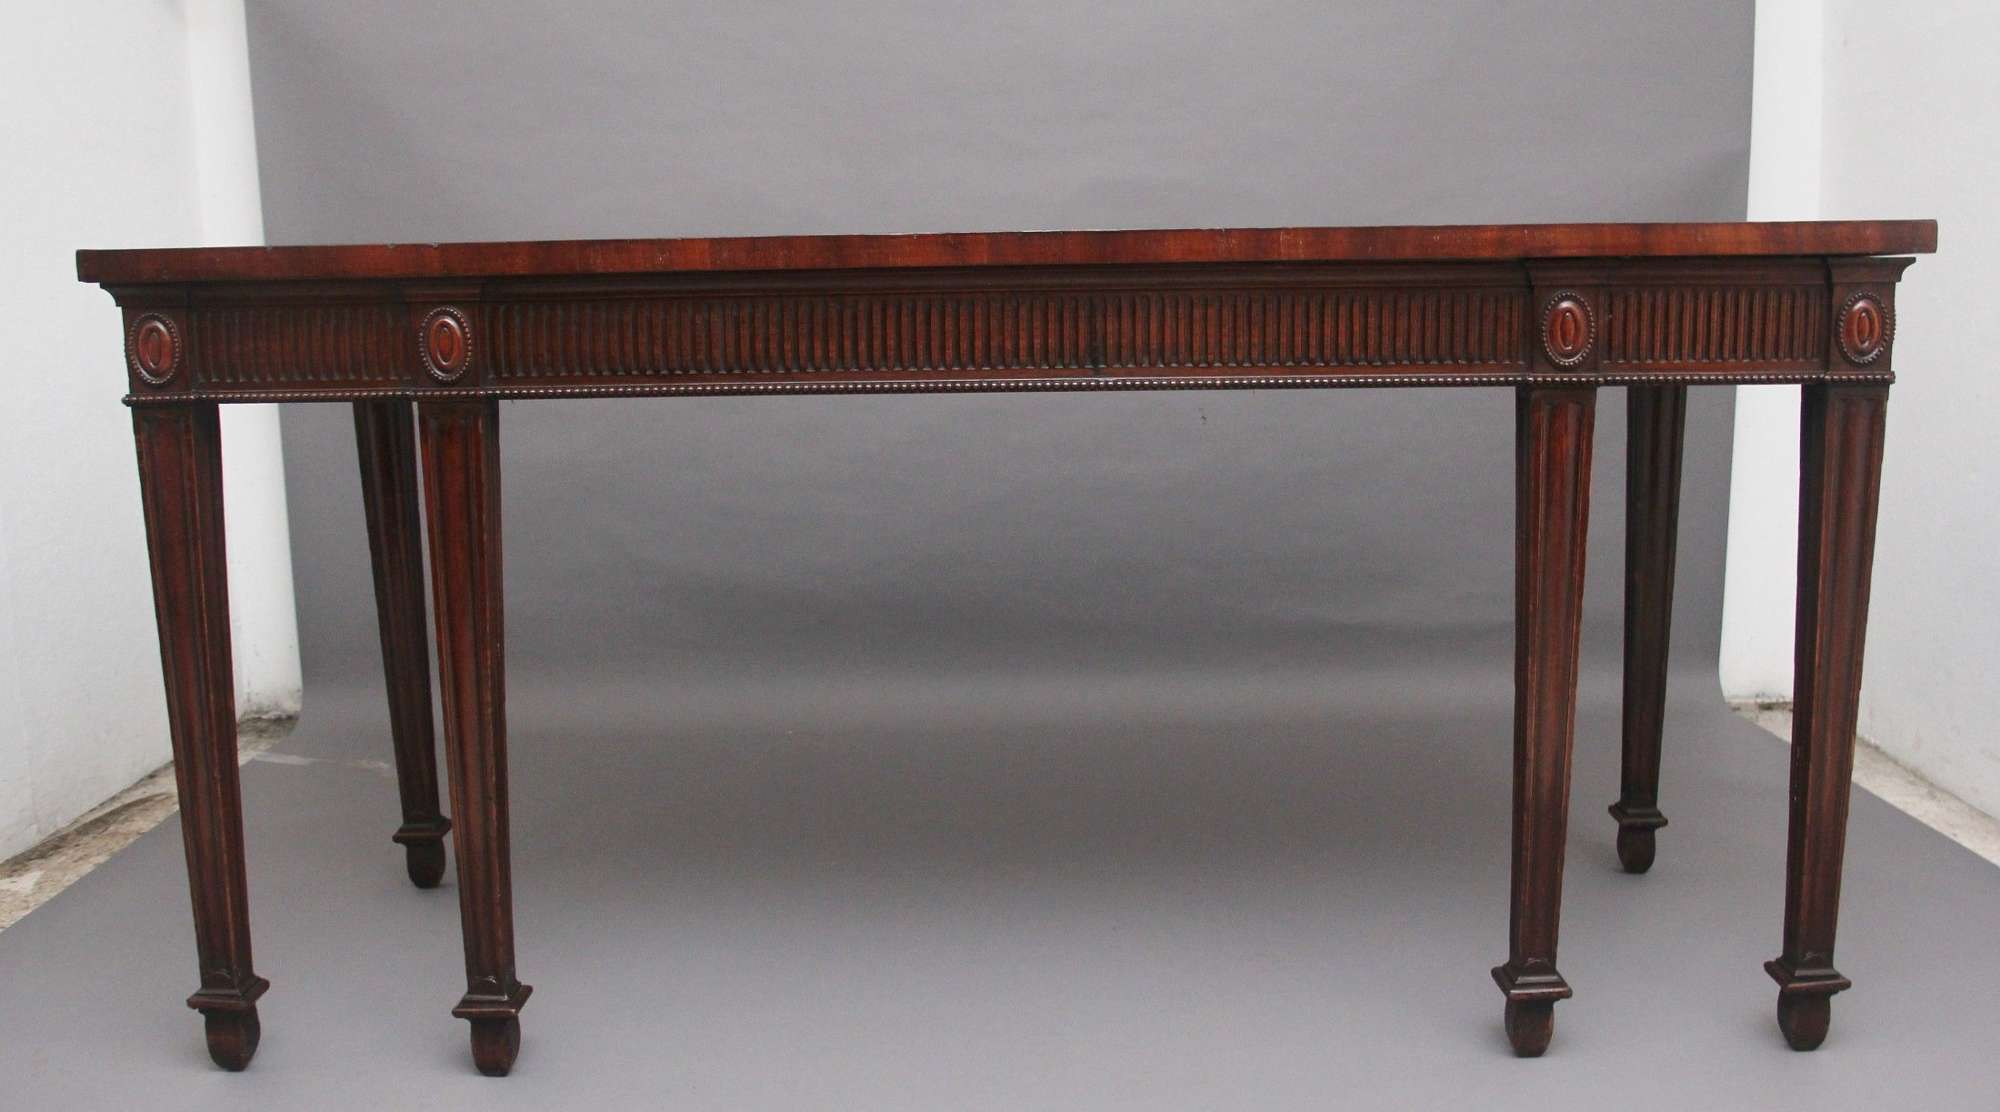 Large Early 20th Century Mahogany Serving Table